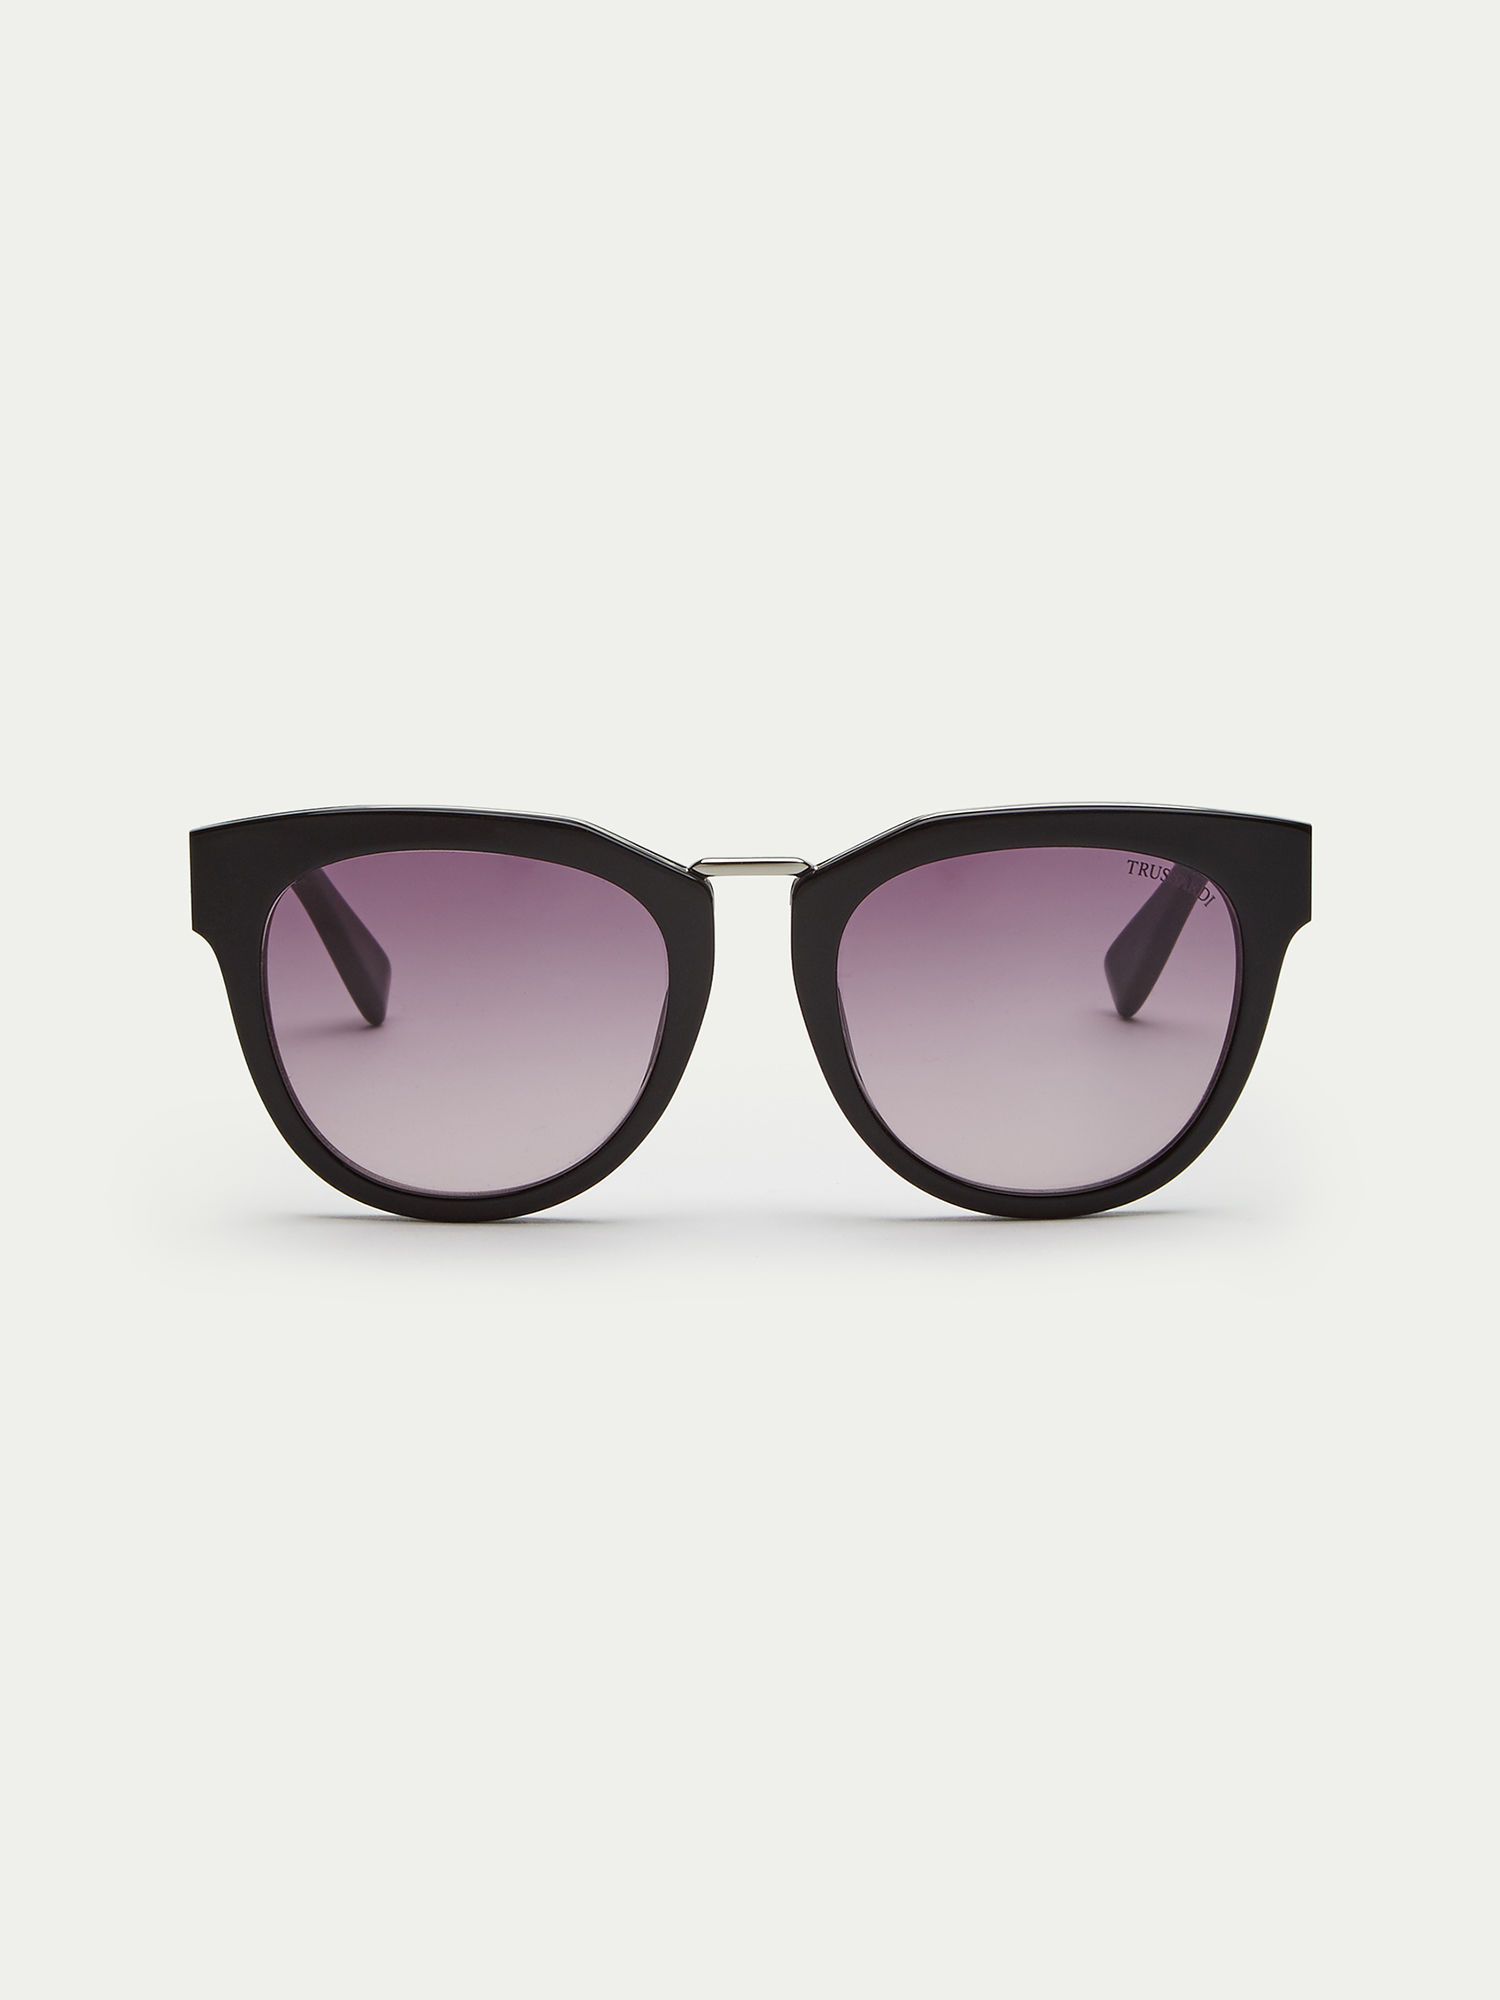 Branded sunglasses with trim detail | Trussardi.comnull